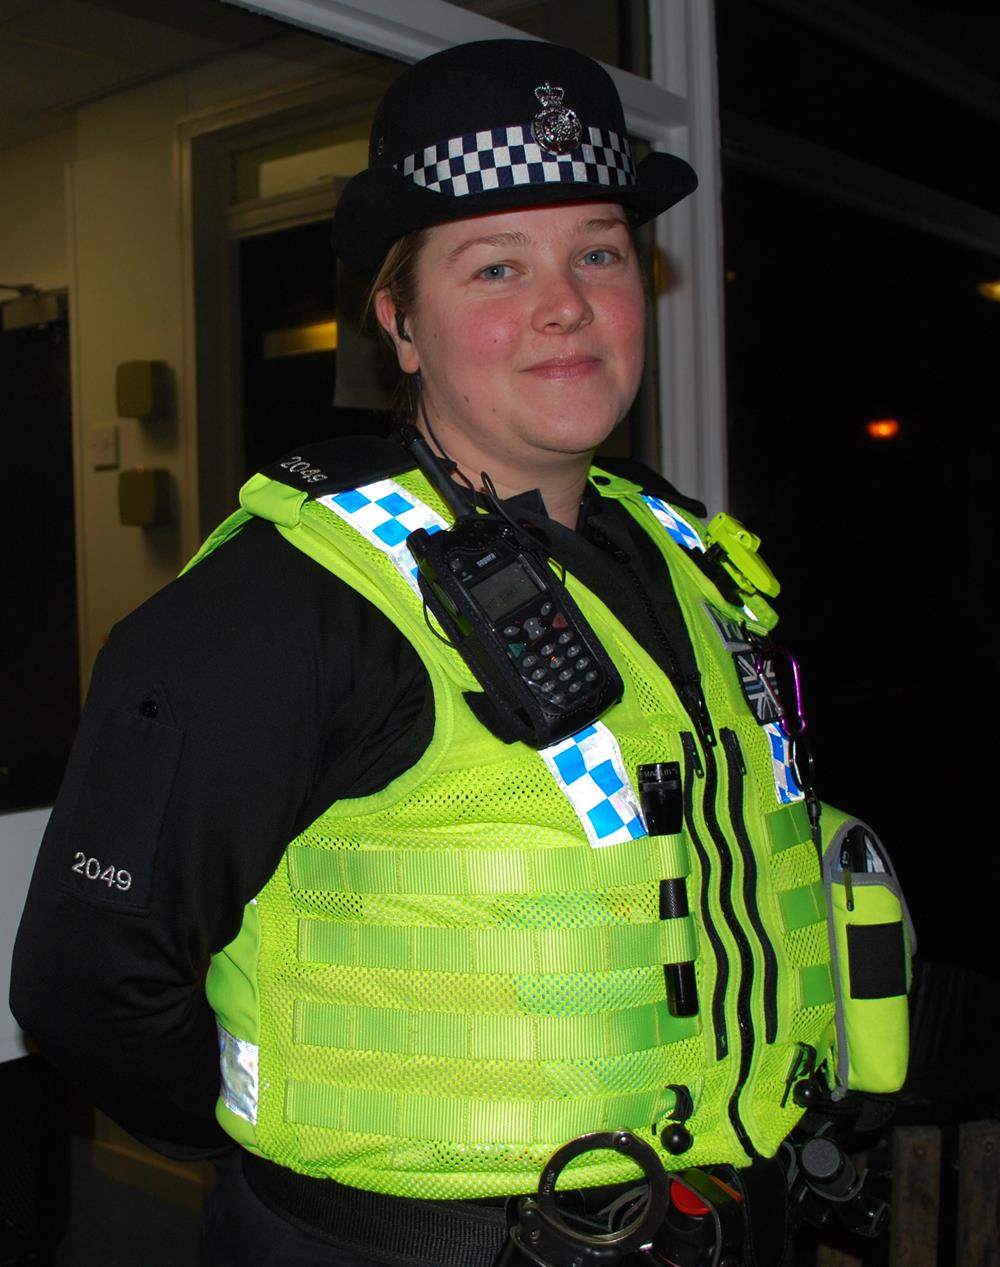 Lucy Hammond is a Special Constable in York